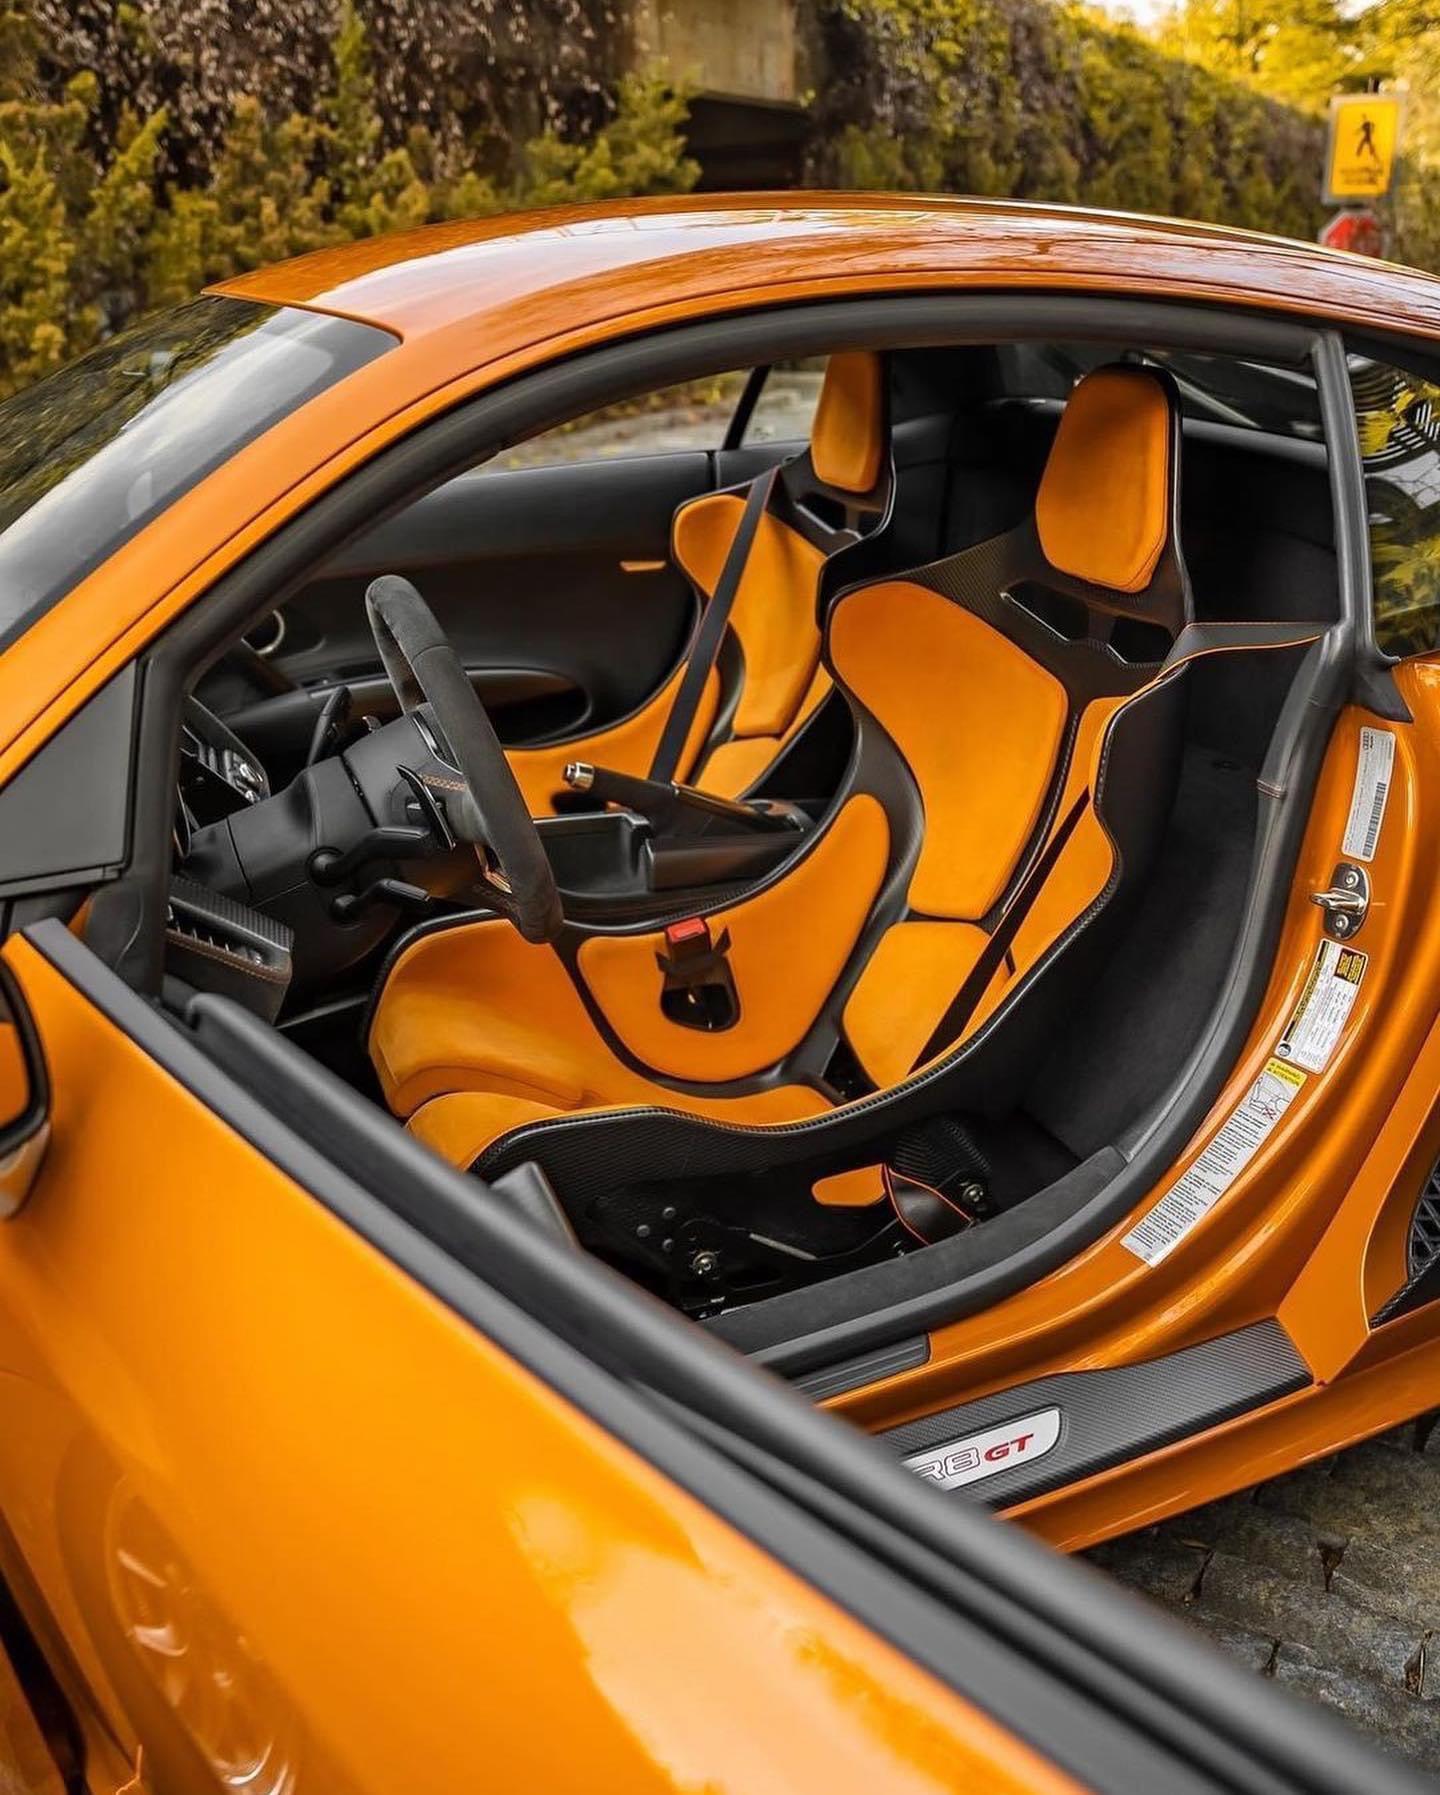 McLaren Senna Style Seats For MP4-12C/570S/600LT/650S/720S/P1 With Side Mount & Bracket & Sliders & Heated Seat